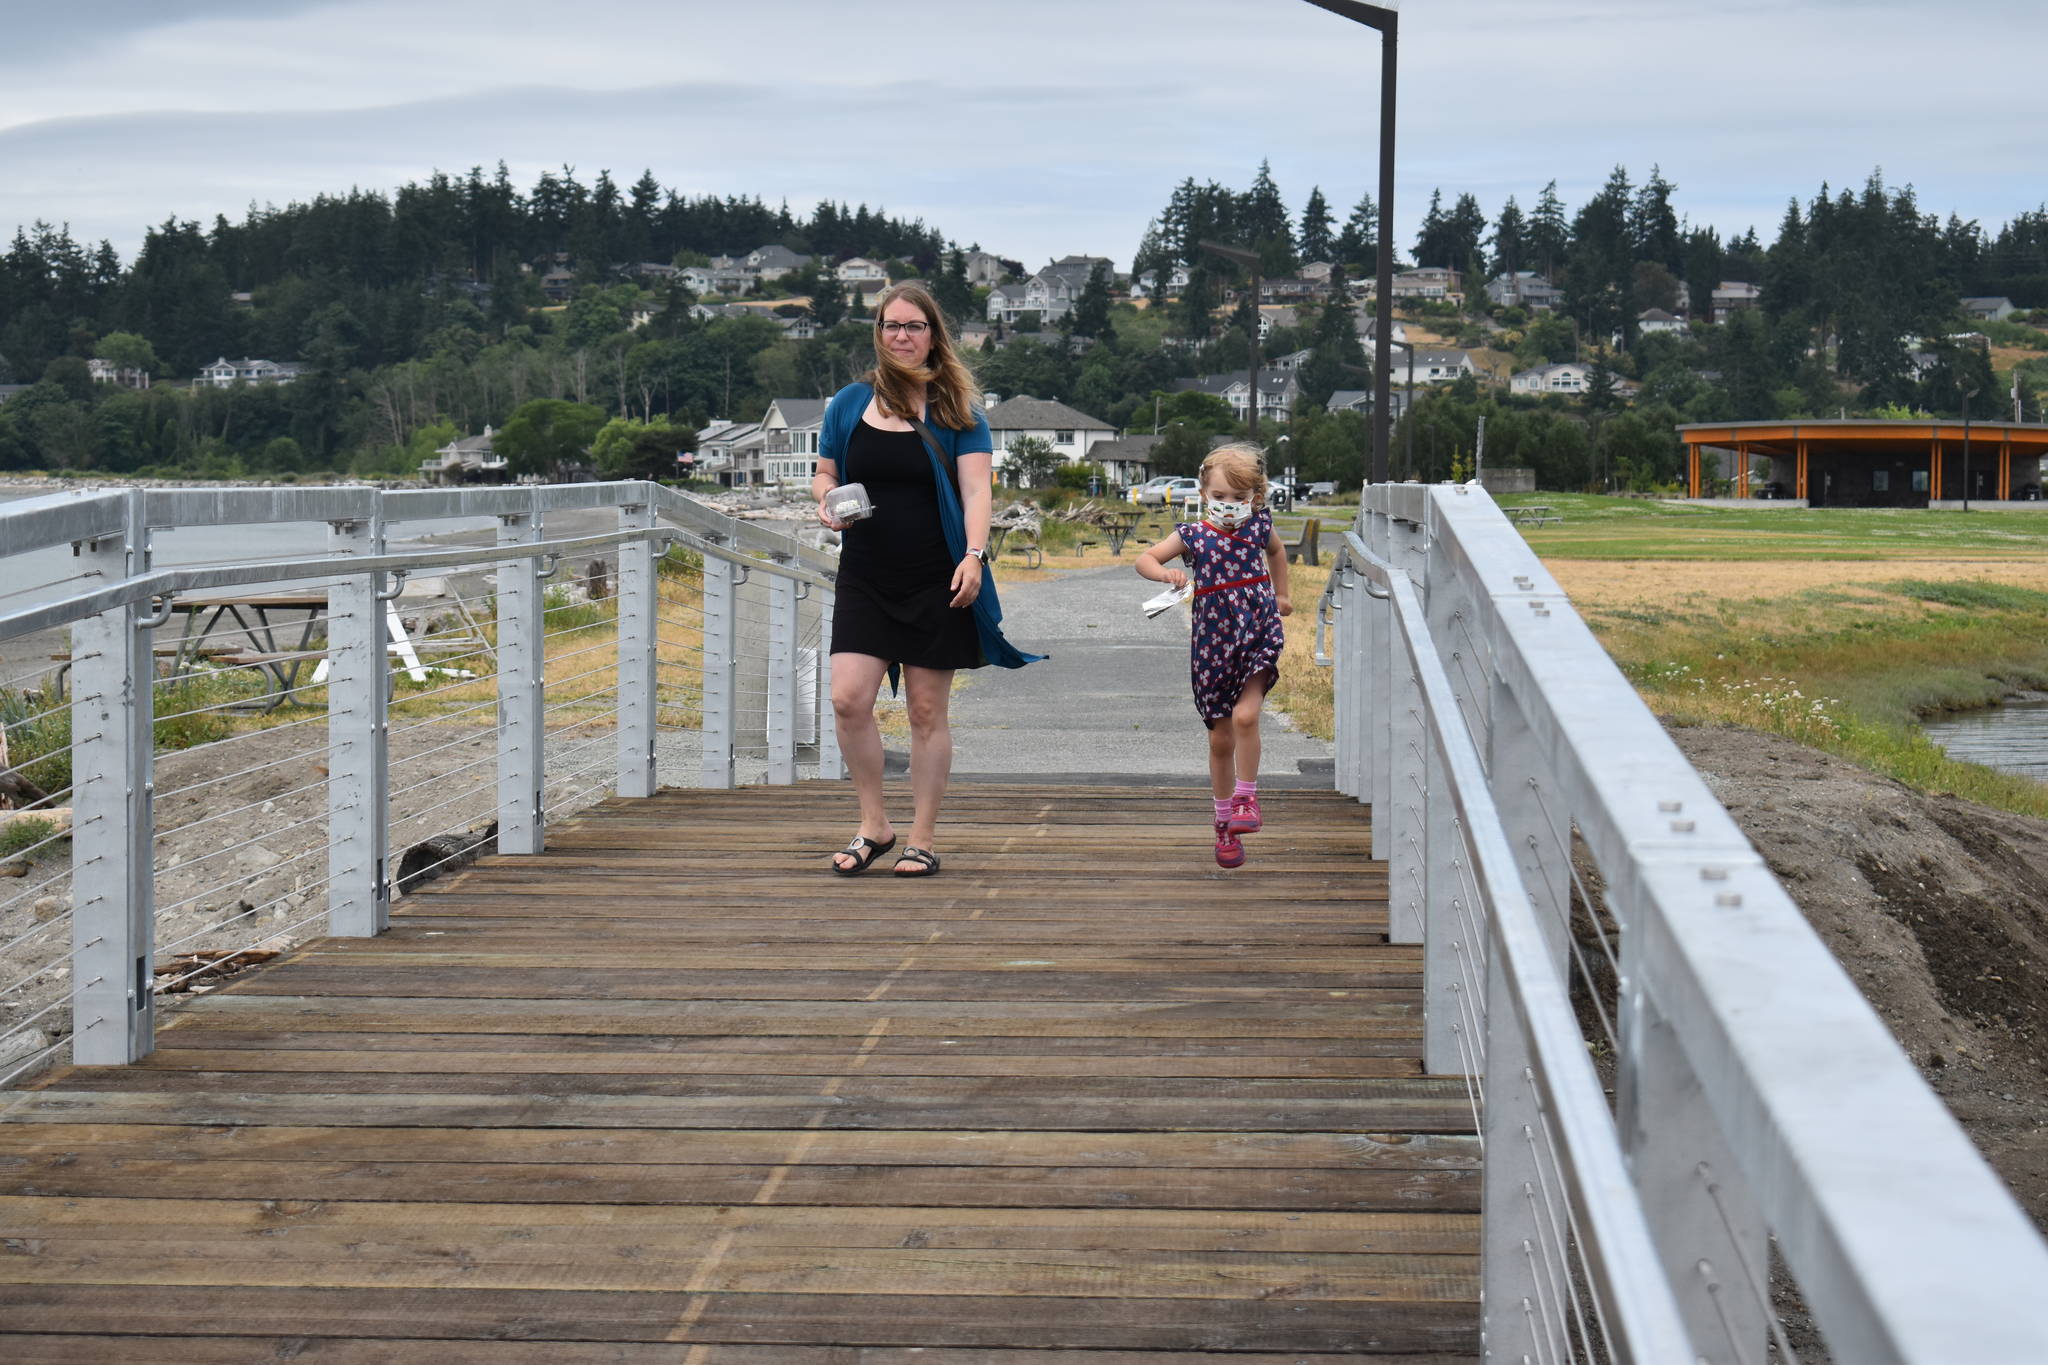 Photo by Emily Gilbert/Whidbey News-Times Katie Toft and her four-year-old daughter Bailey walk across the newly renovated Rotary Memorial Bridge. Katie Toft’s father, Dick Toft, is one of the Rotarians memorialized on a plaque next to the bridge.